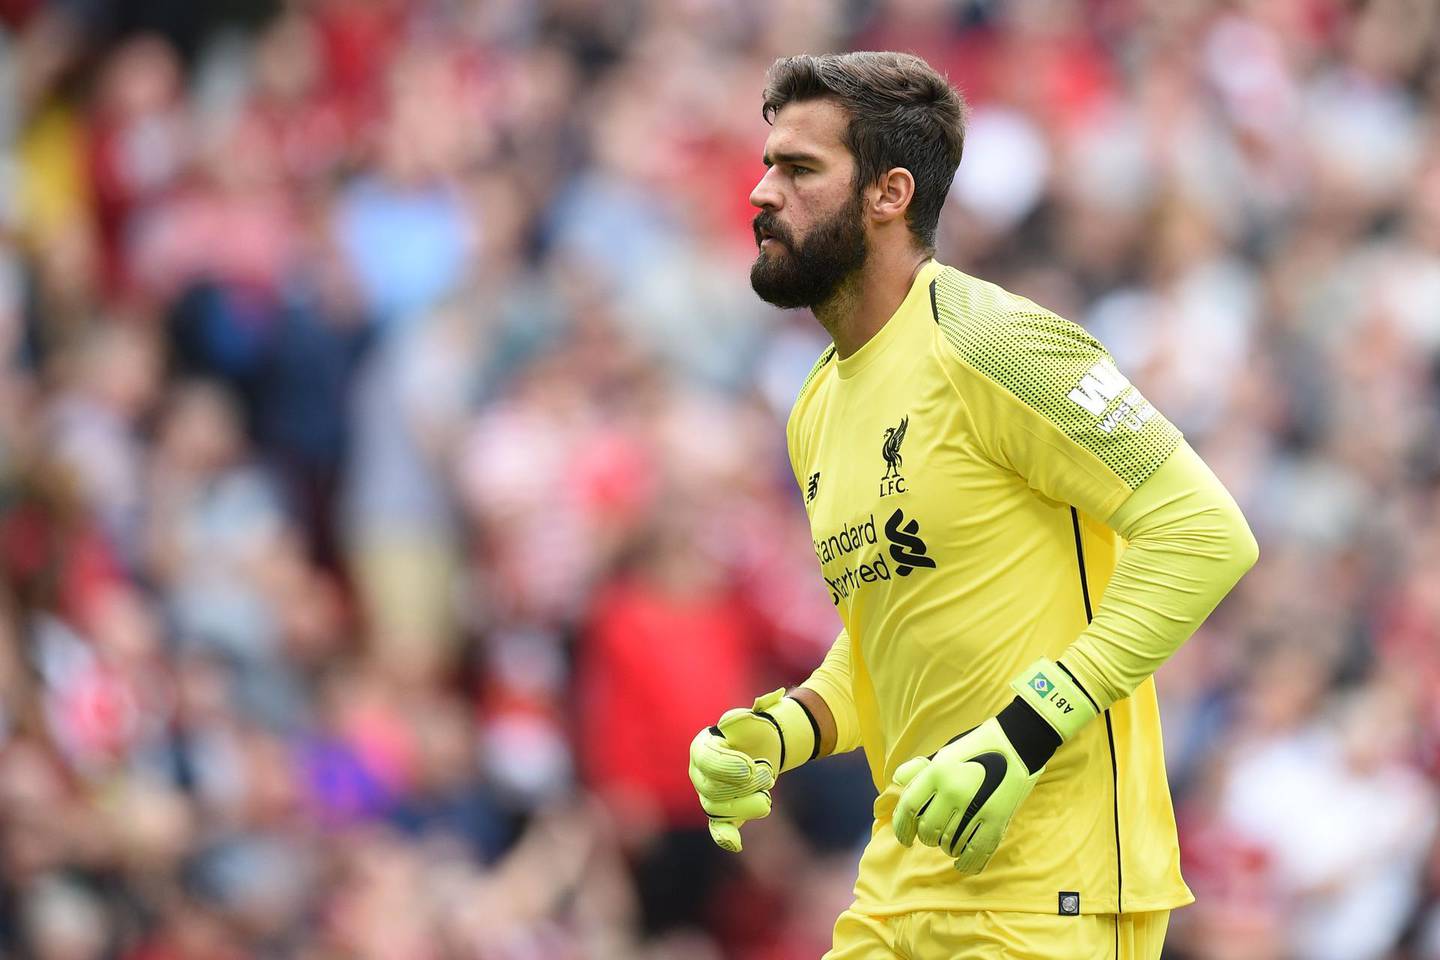 Liverpool's Brazilian goalkeeper Alisson Becker makes his Premier League debut during the English Premier League football match between Liverpool and West Ham United at Anfield in Liverpool, north west England on August 12, 2018. (Photo by Oli SCARFF / AFP) / RESTRICTED TO EDITORIAL USE. No use with unauthorized audio, video, data, fixture lists, club/league logos or 'live' services. Online in-match use limited to 120 images. An additional 40 images may be used in extra time. No video emulation. Social media in-match use limited to 120 images. An additional 40 images may be used in extra time. No use in betting publications, games or single club/league/player publications. / 